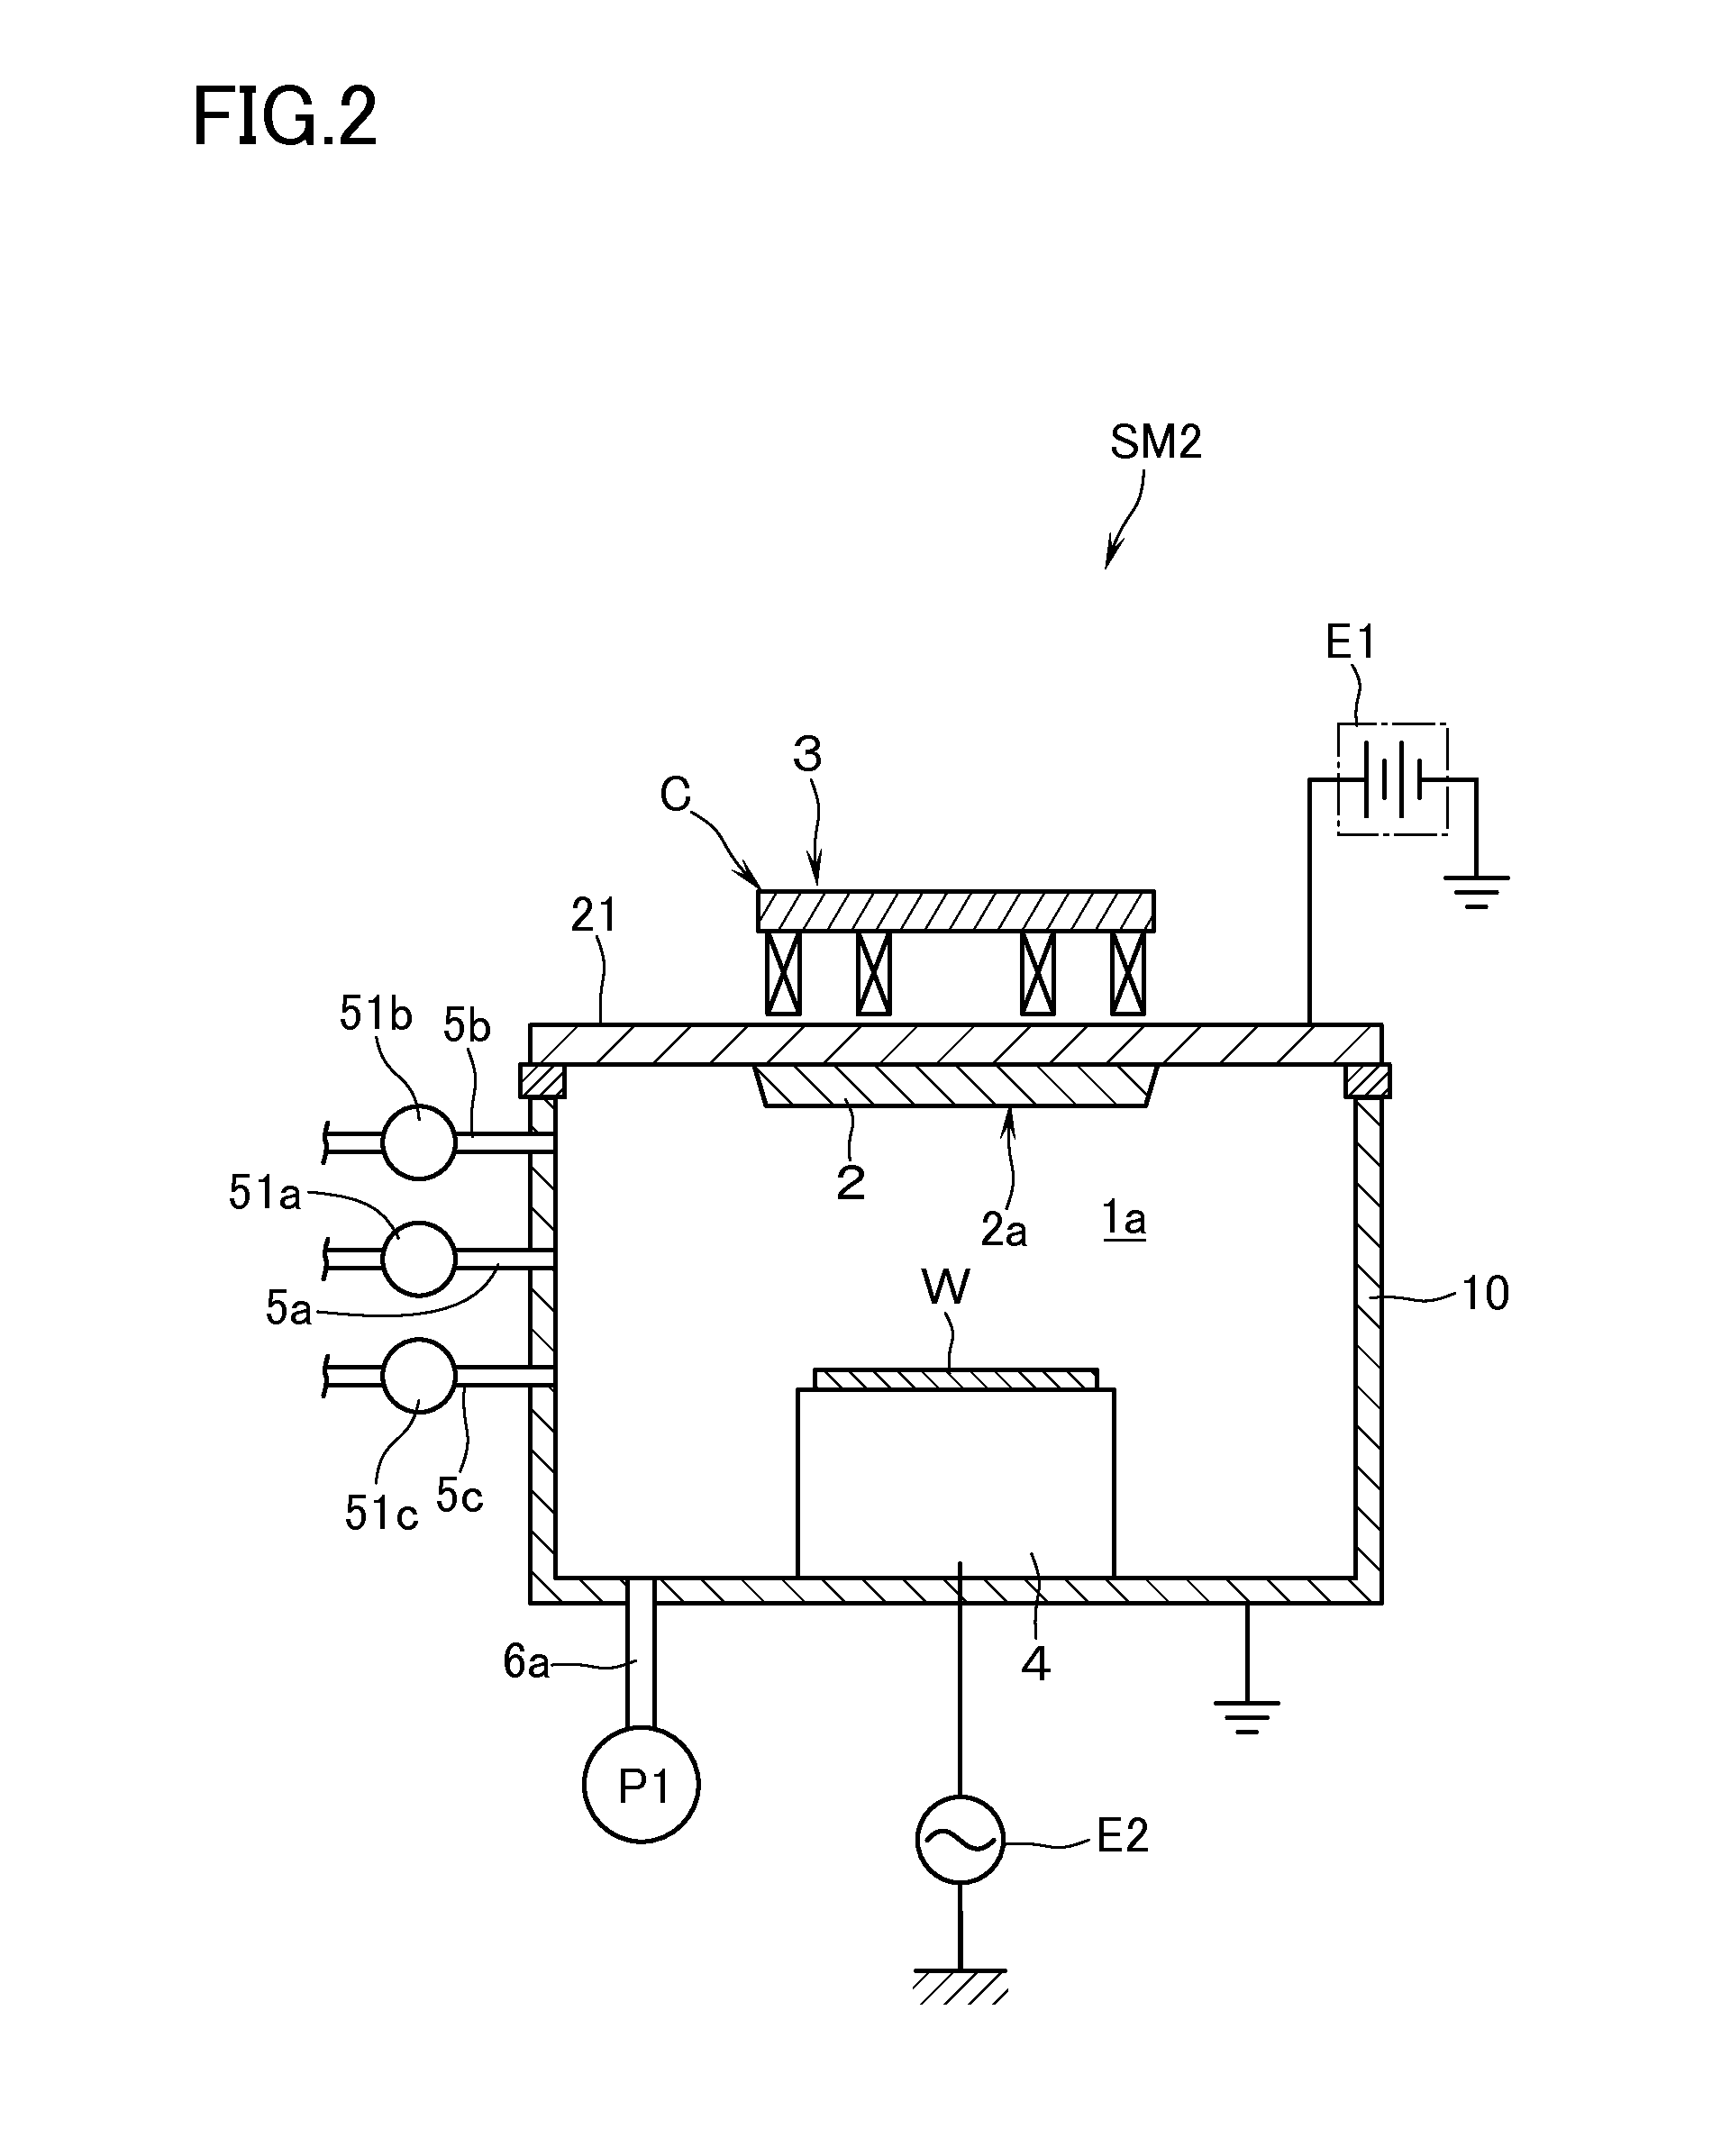 Method of, and apparatus for, forming hard mask